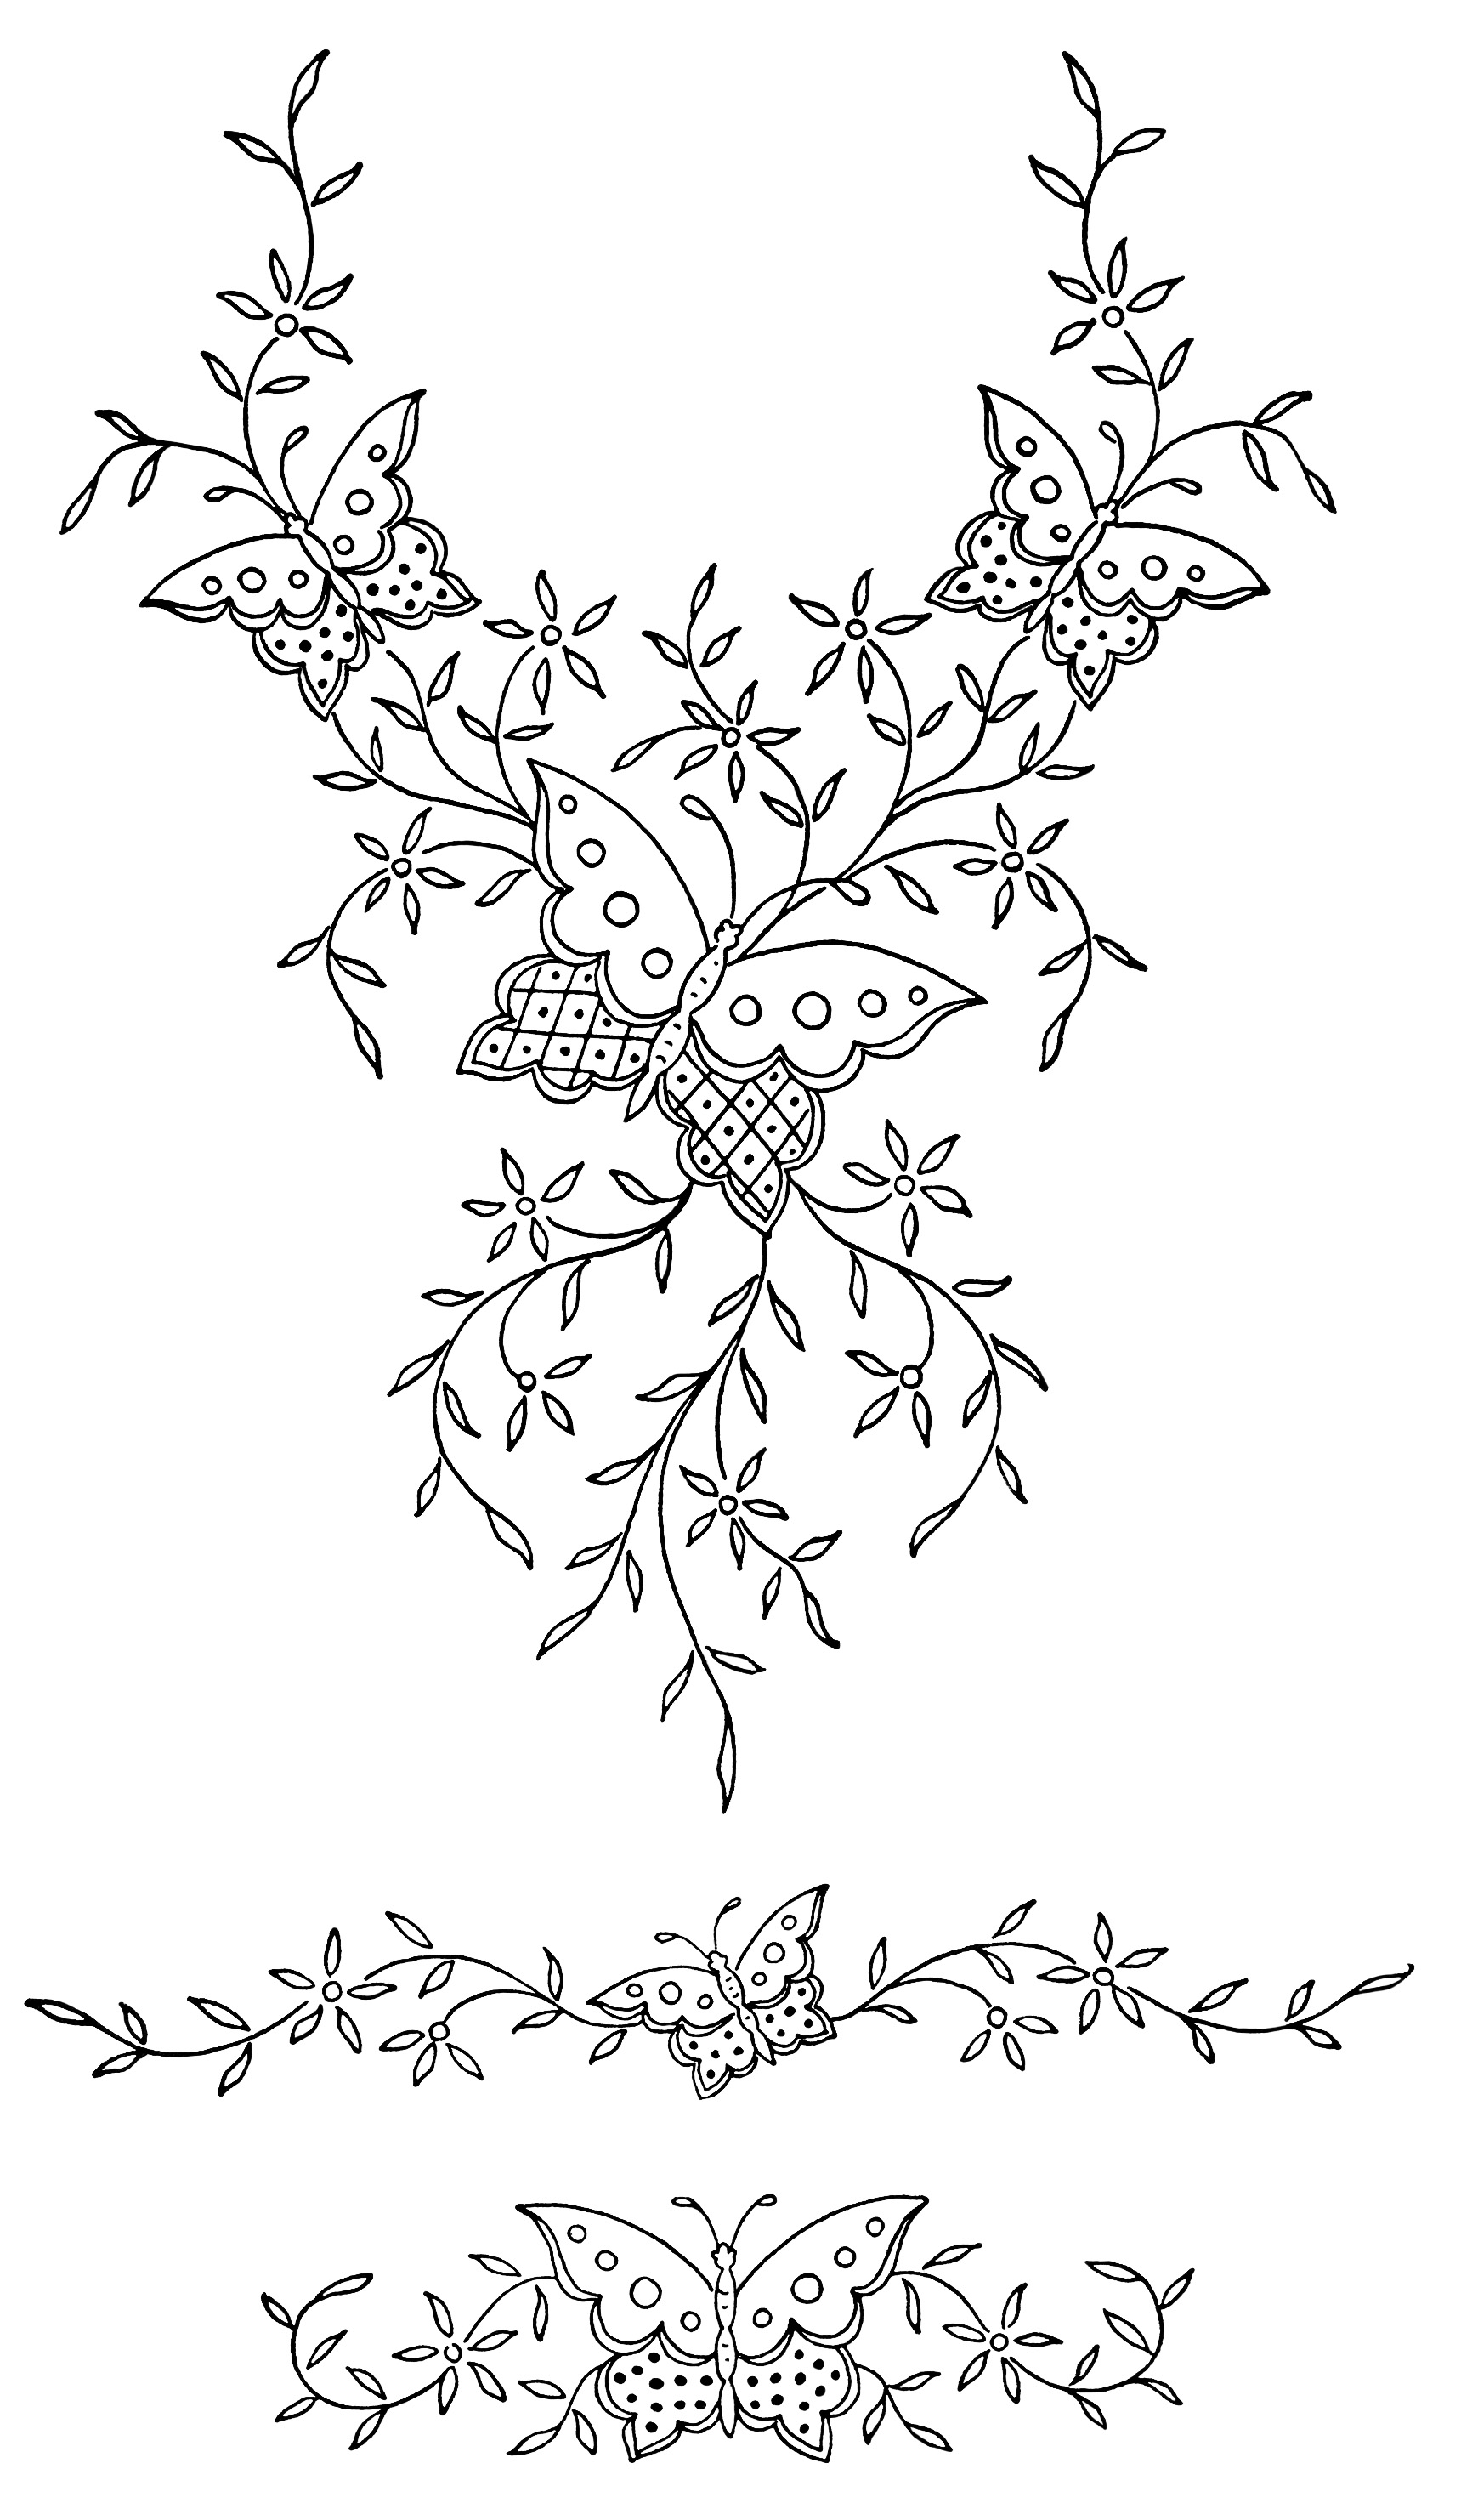 Butterfly Embroidery Pattern Butterflies And Flowers Free Vintage Clip Art Old Design Shop Blog